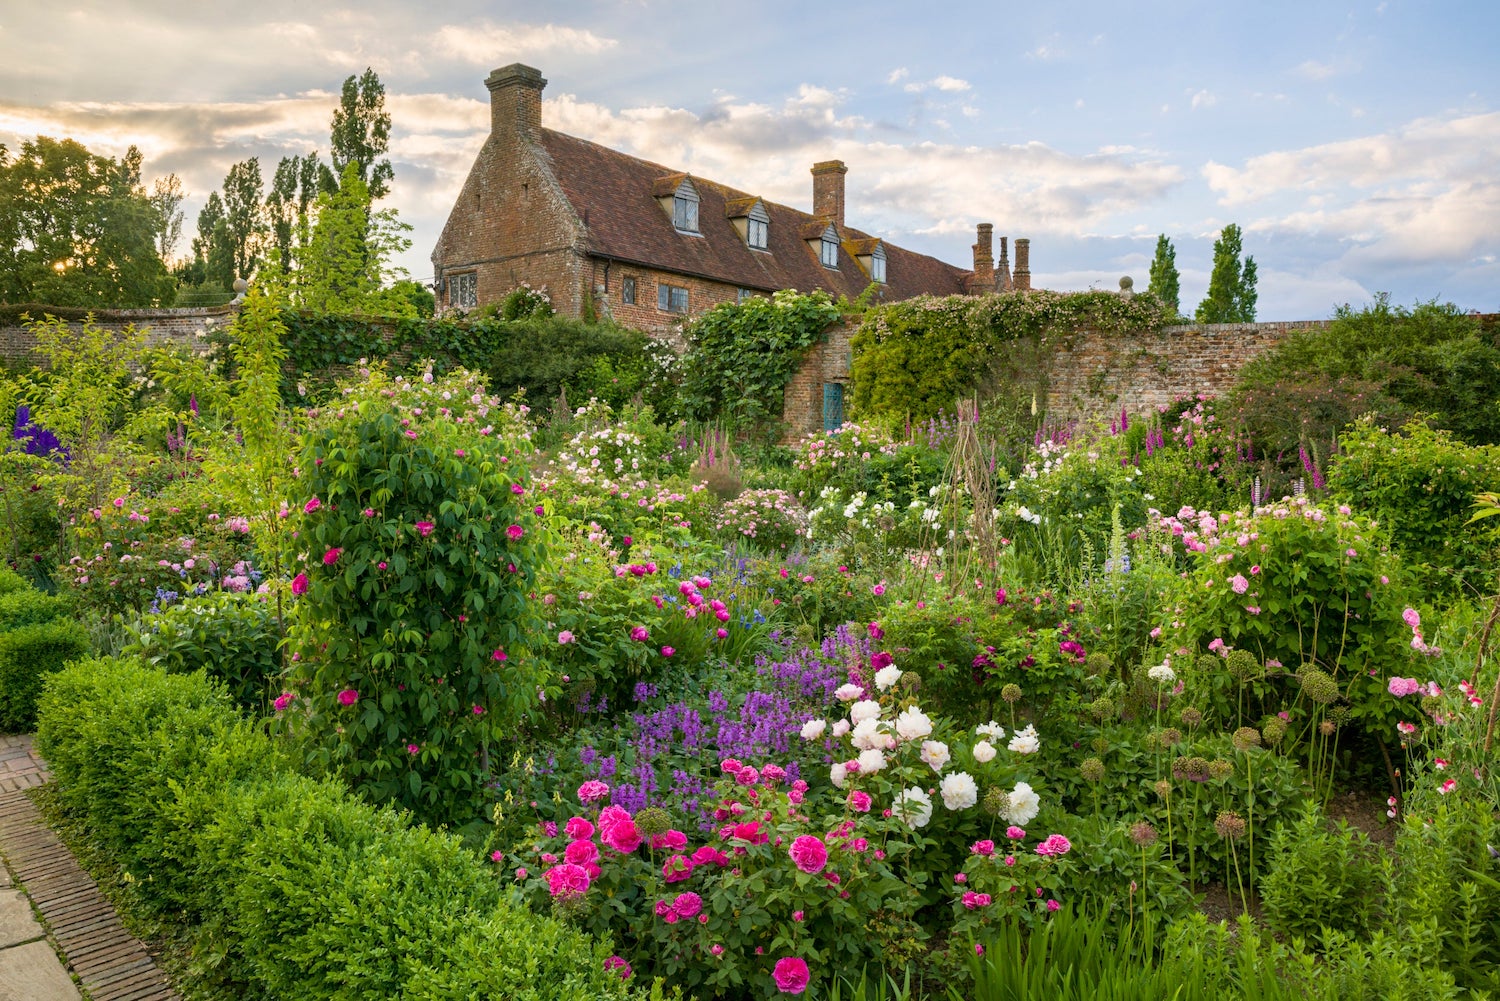 Sissinghurst Garden blooming with an abundance of pink, purple and white flowers